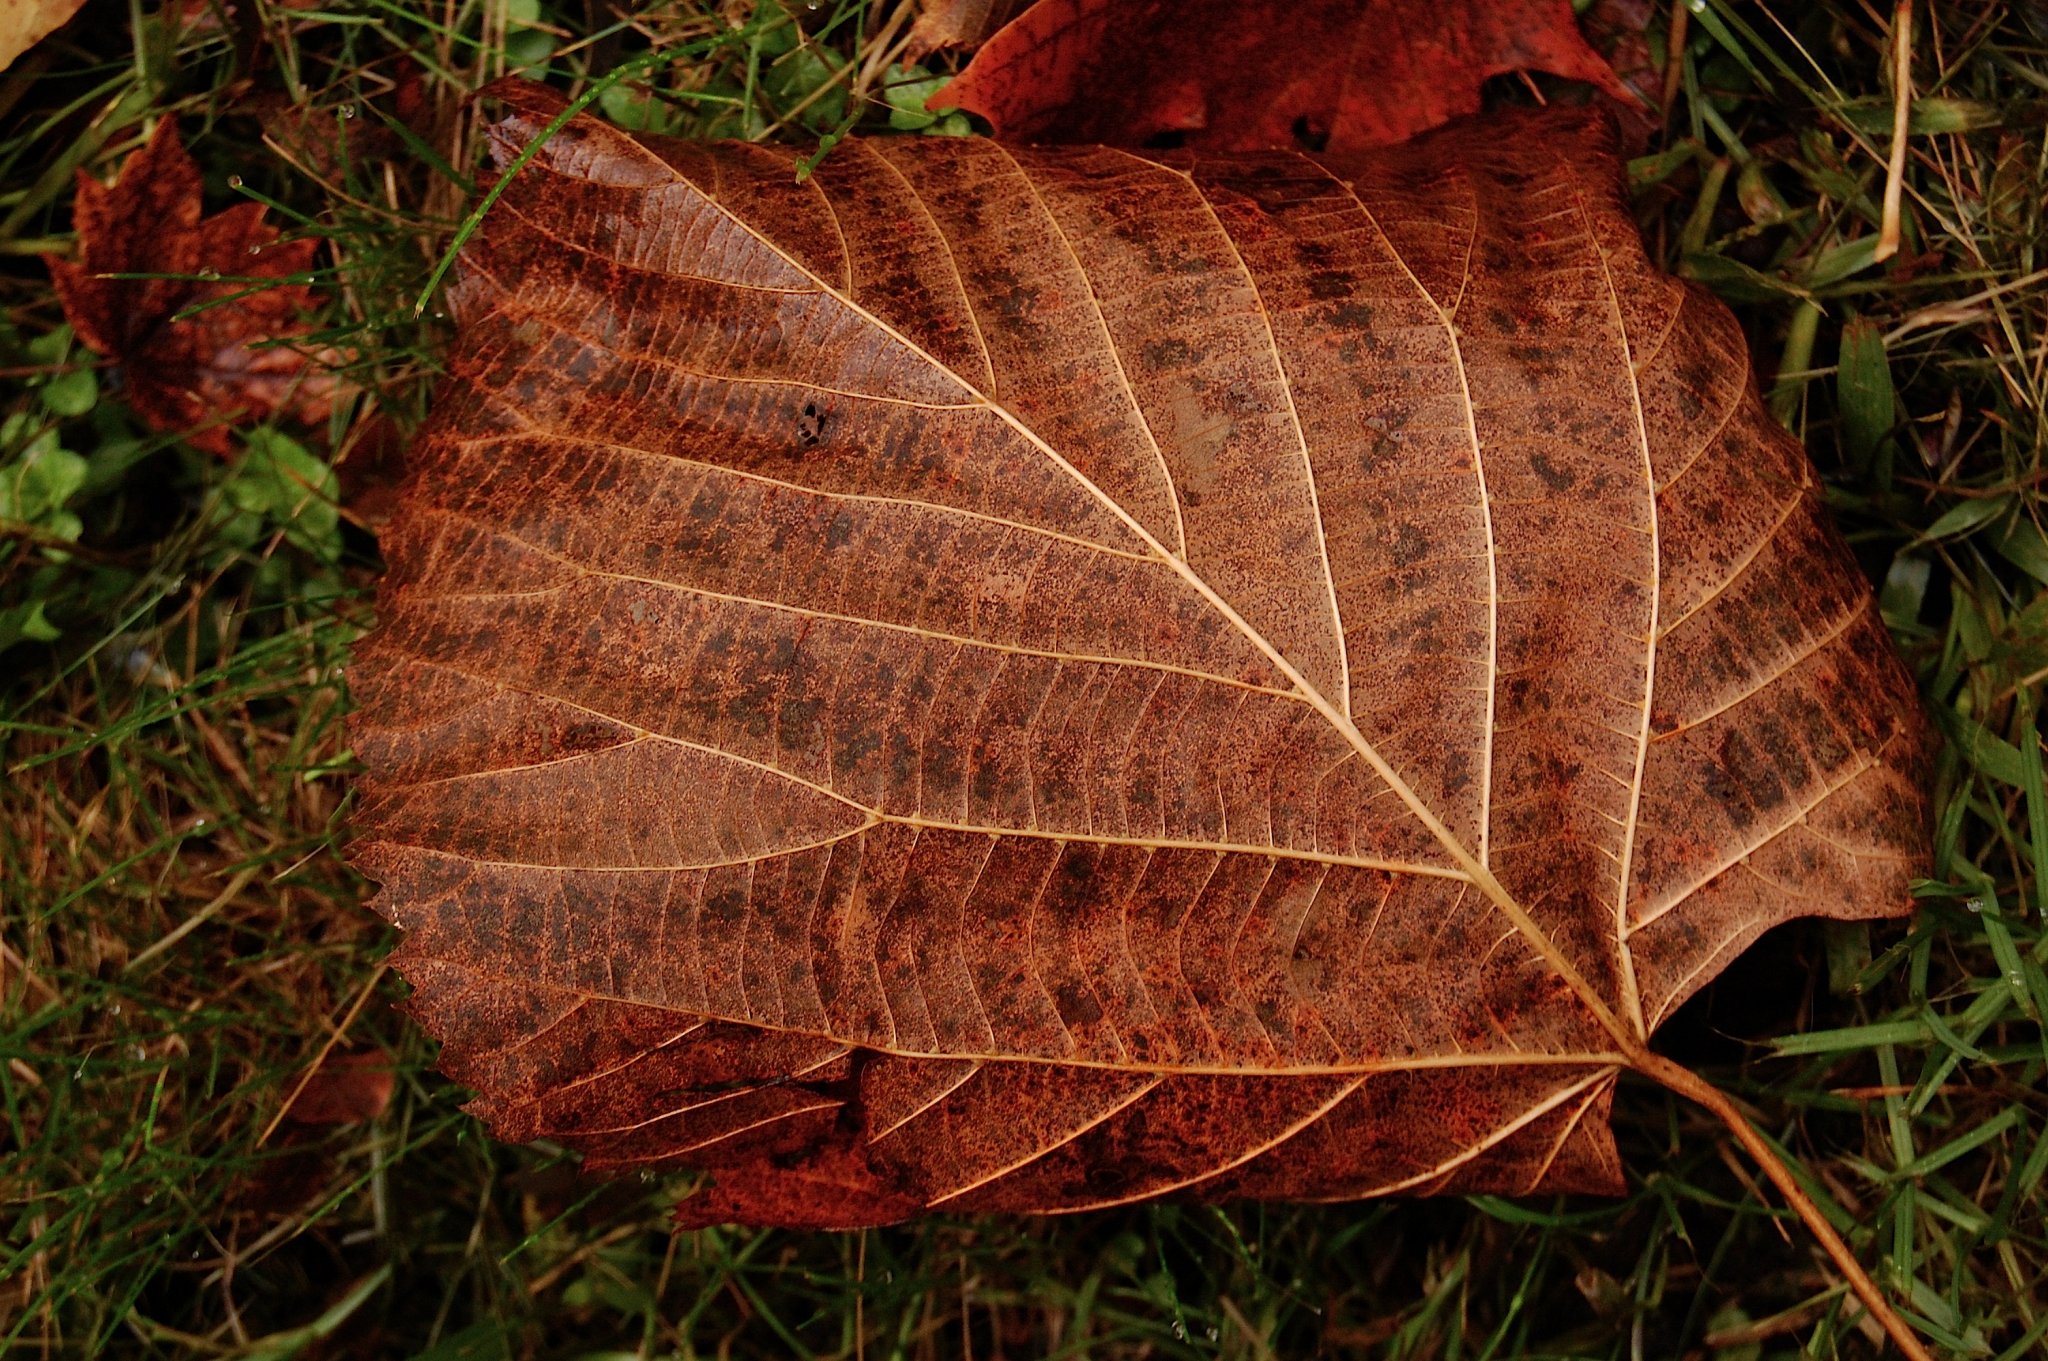 A leaf on the ground in a rich chestnut color